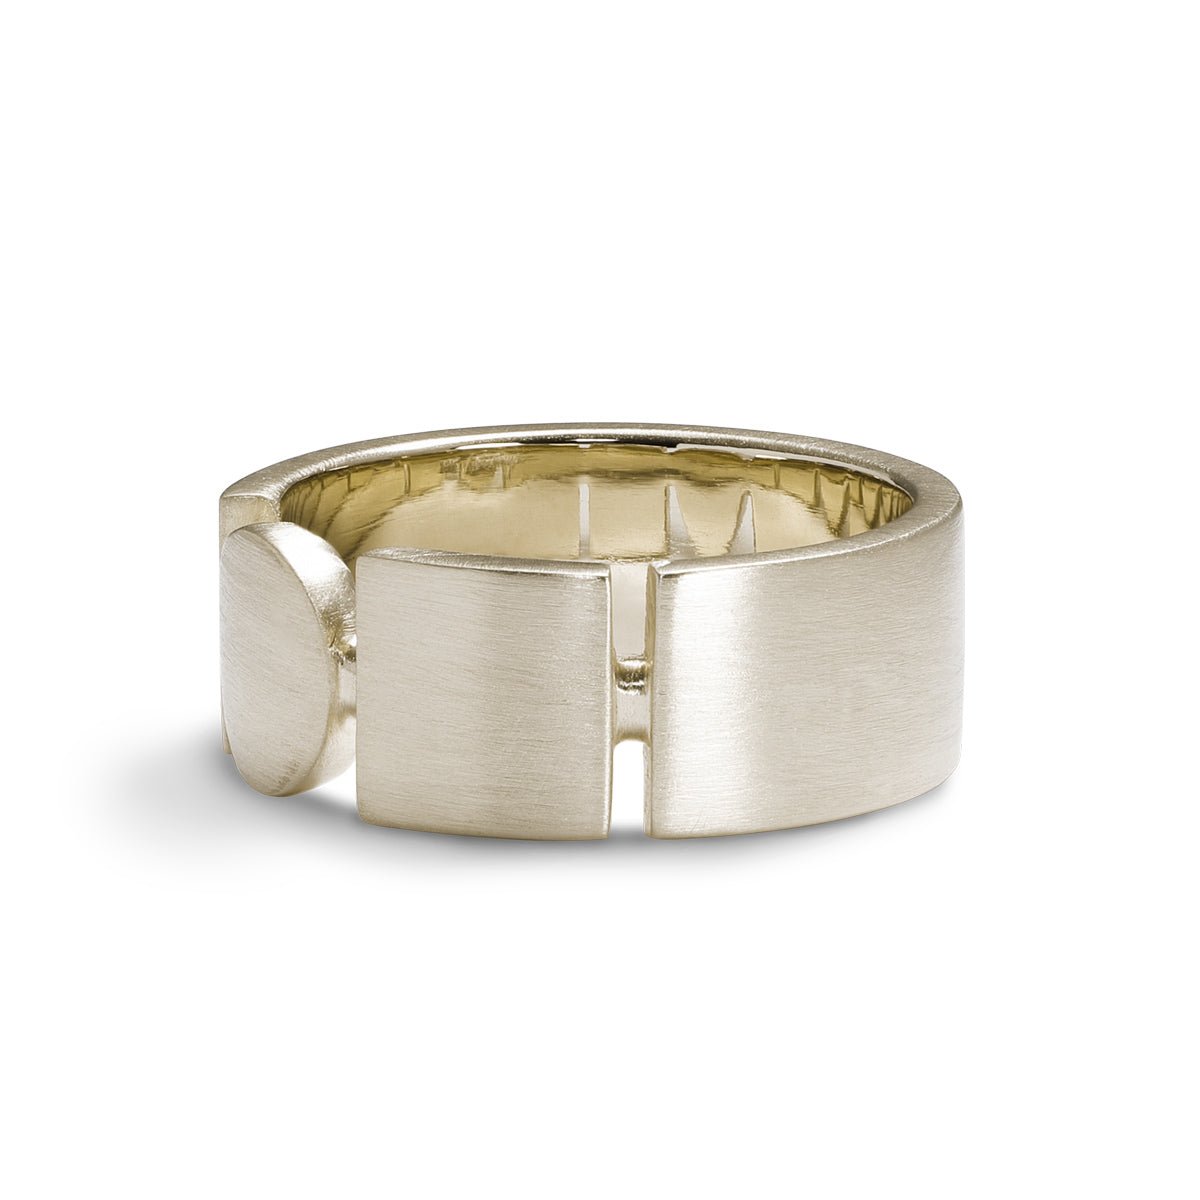 Square and circle motif Forma band. Made with 14K recycled white gold in Portland, Oregon.